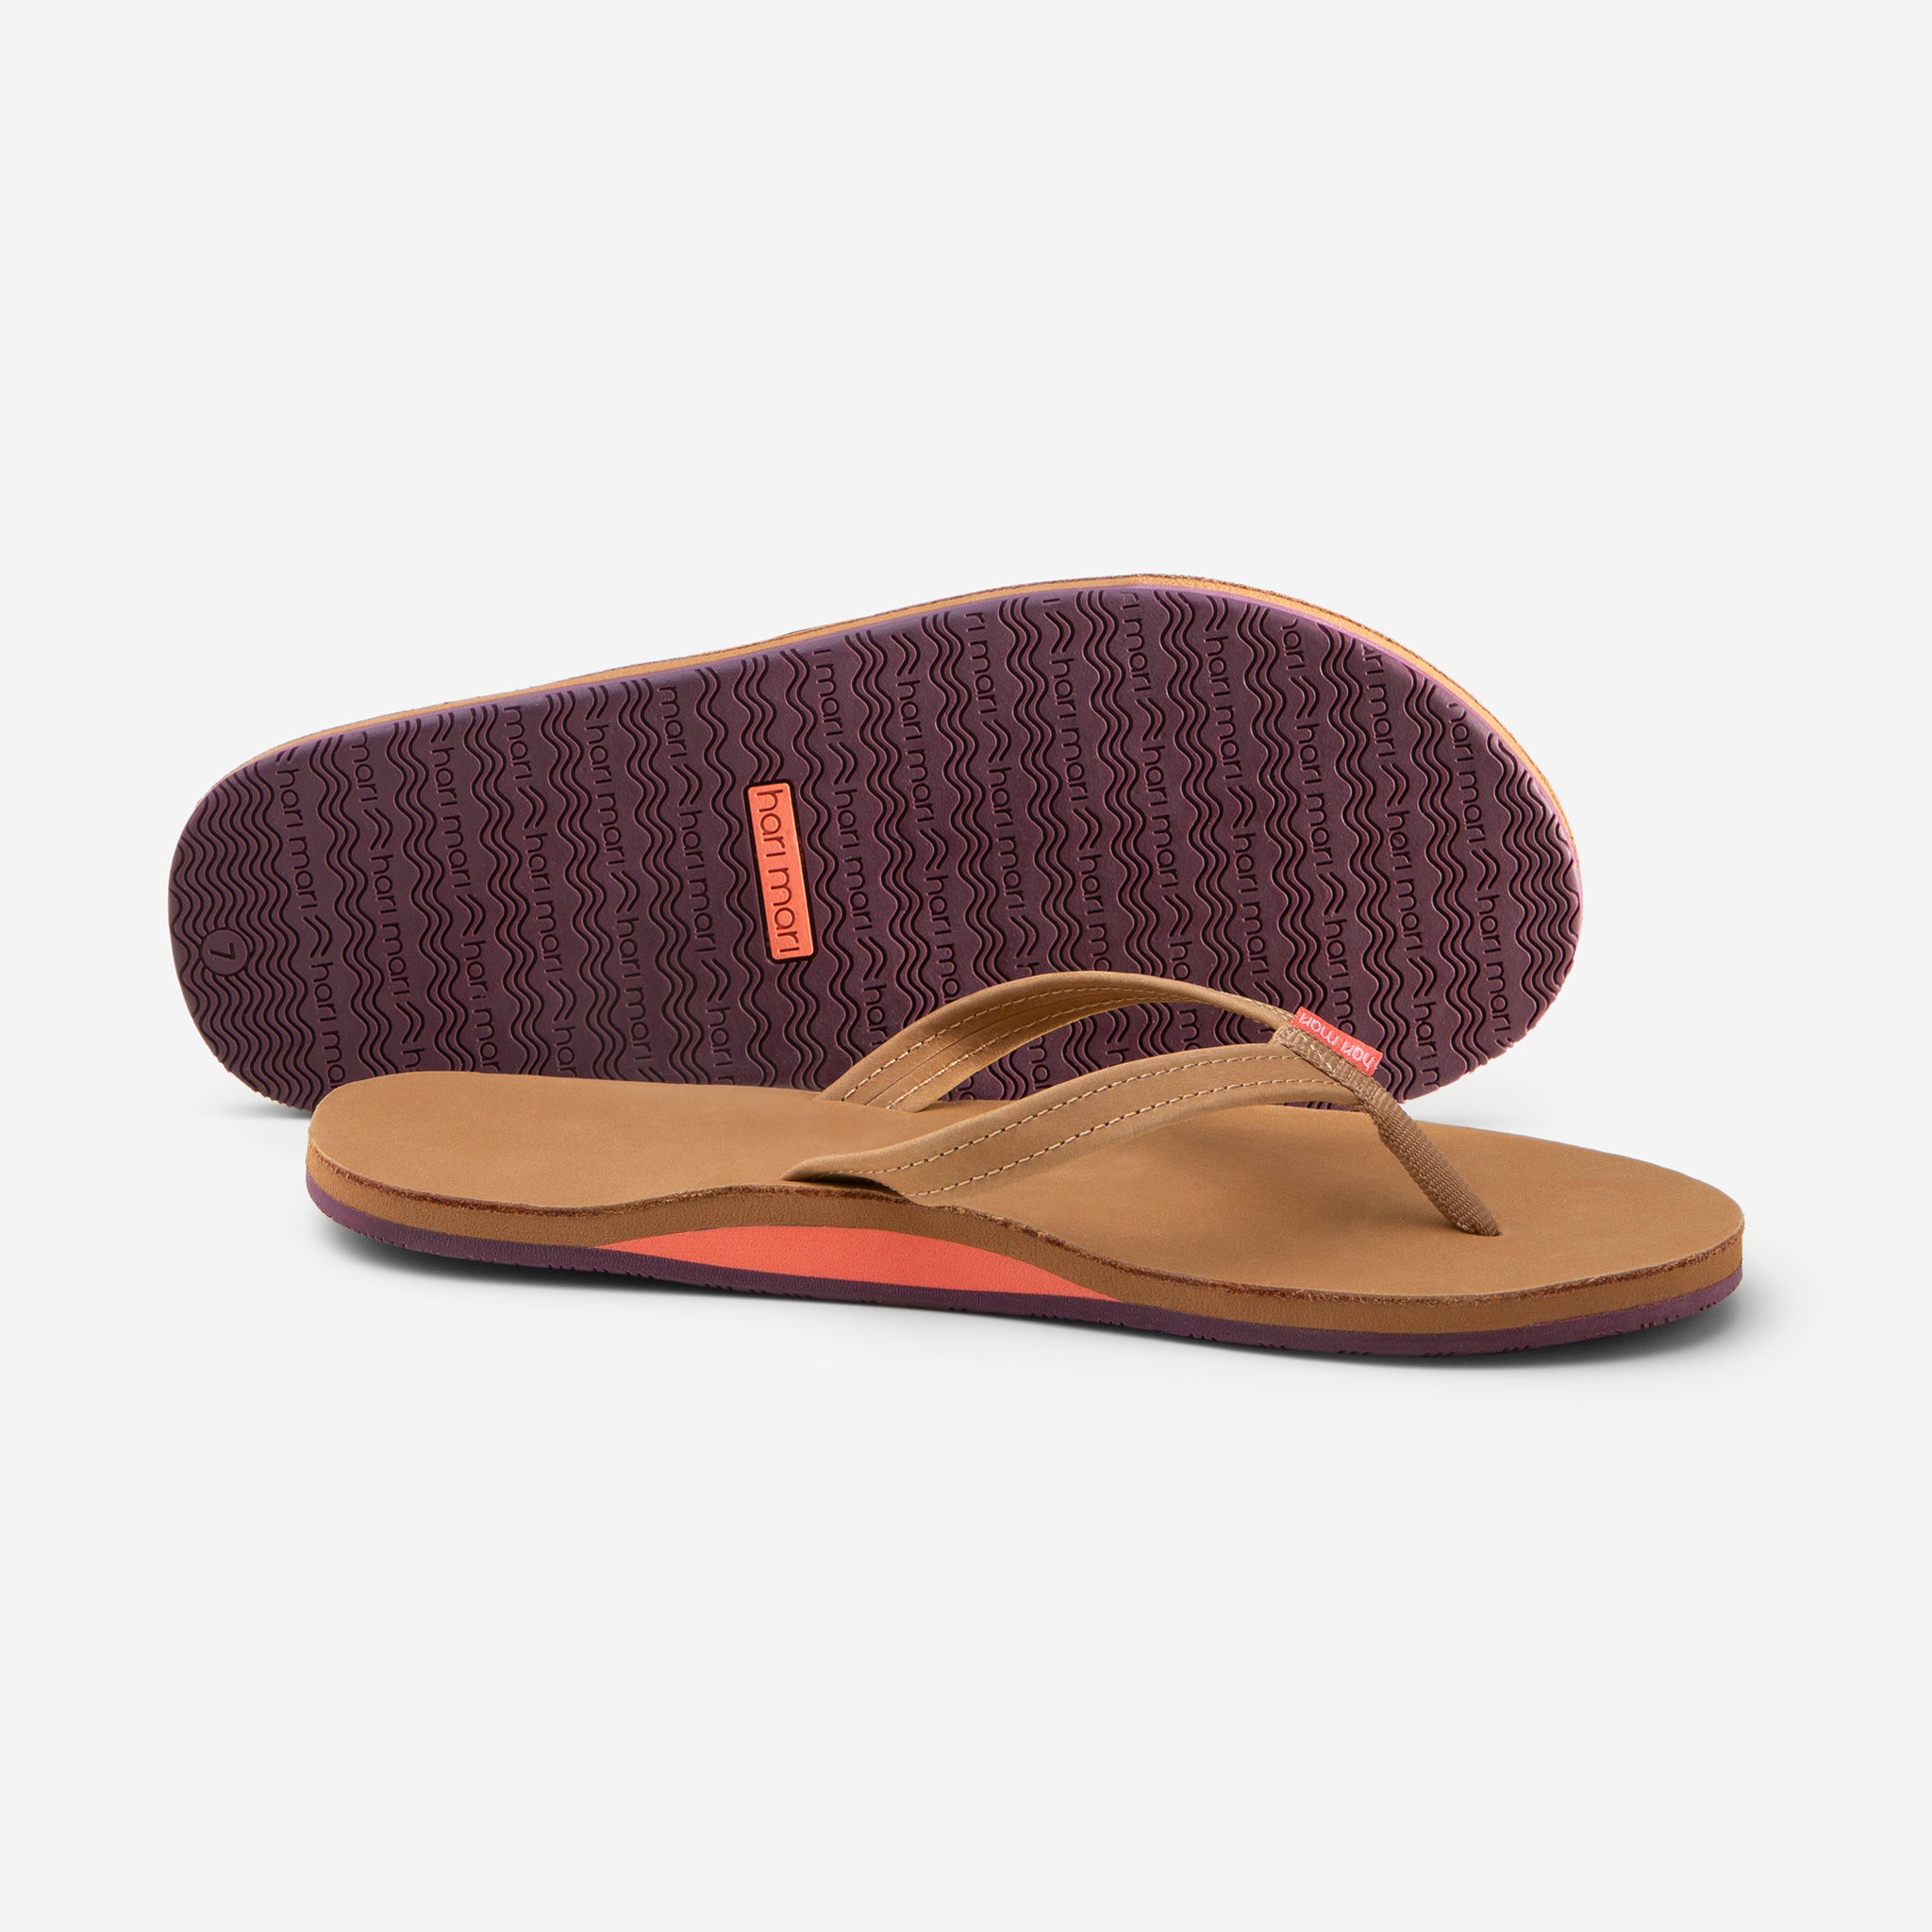 Hari Mari Women's fields flip flops in tan/fig picture showing shoe and bottom of shoe rubber outsole on white background